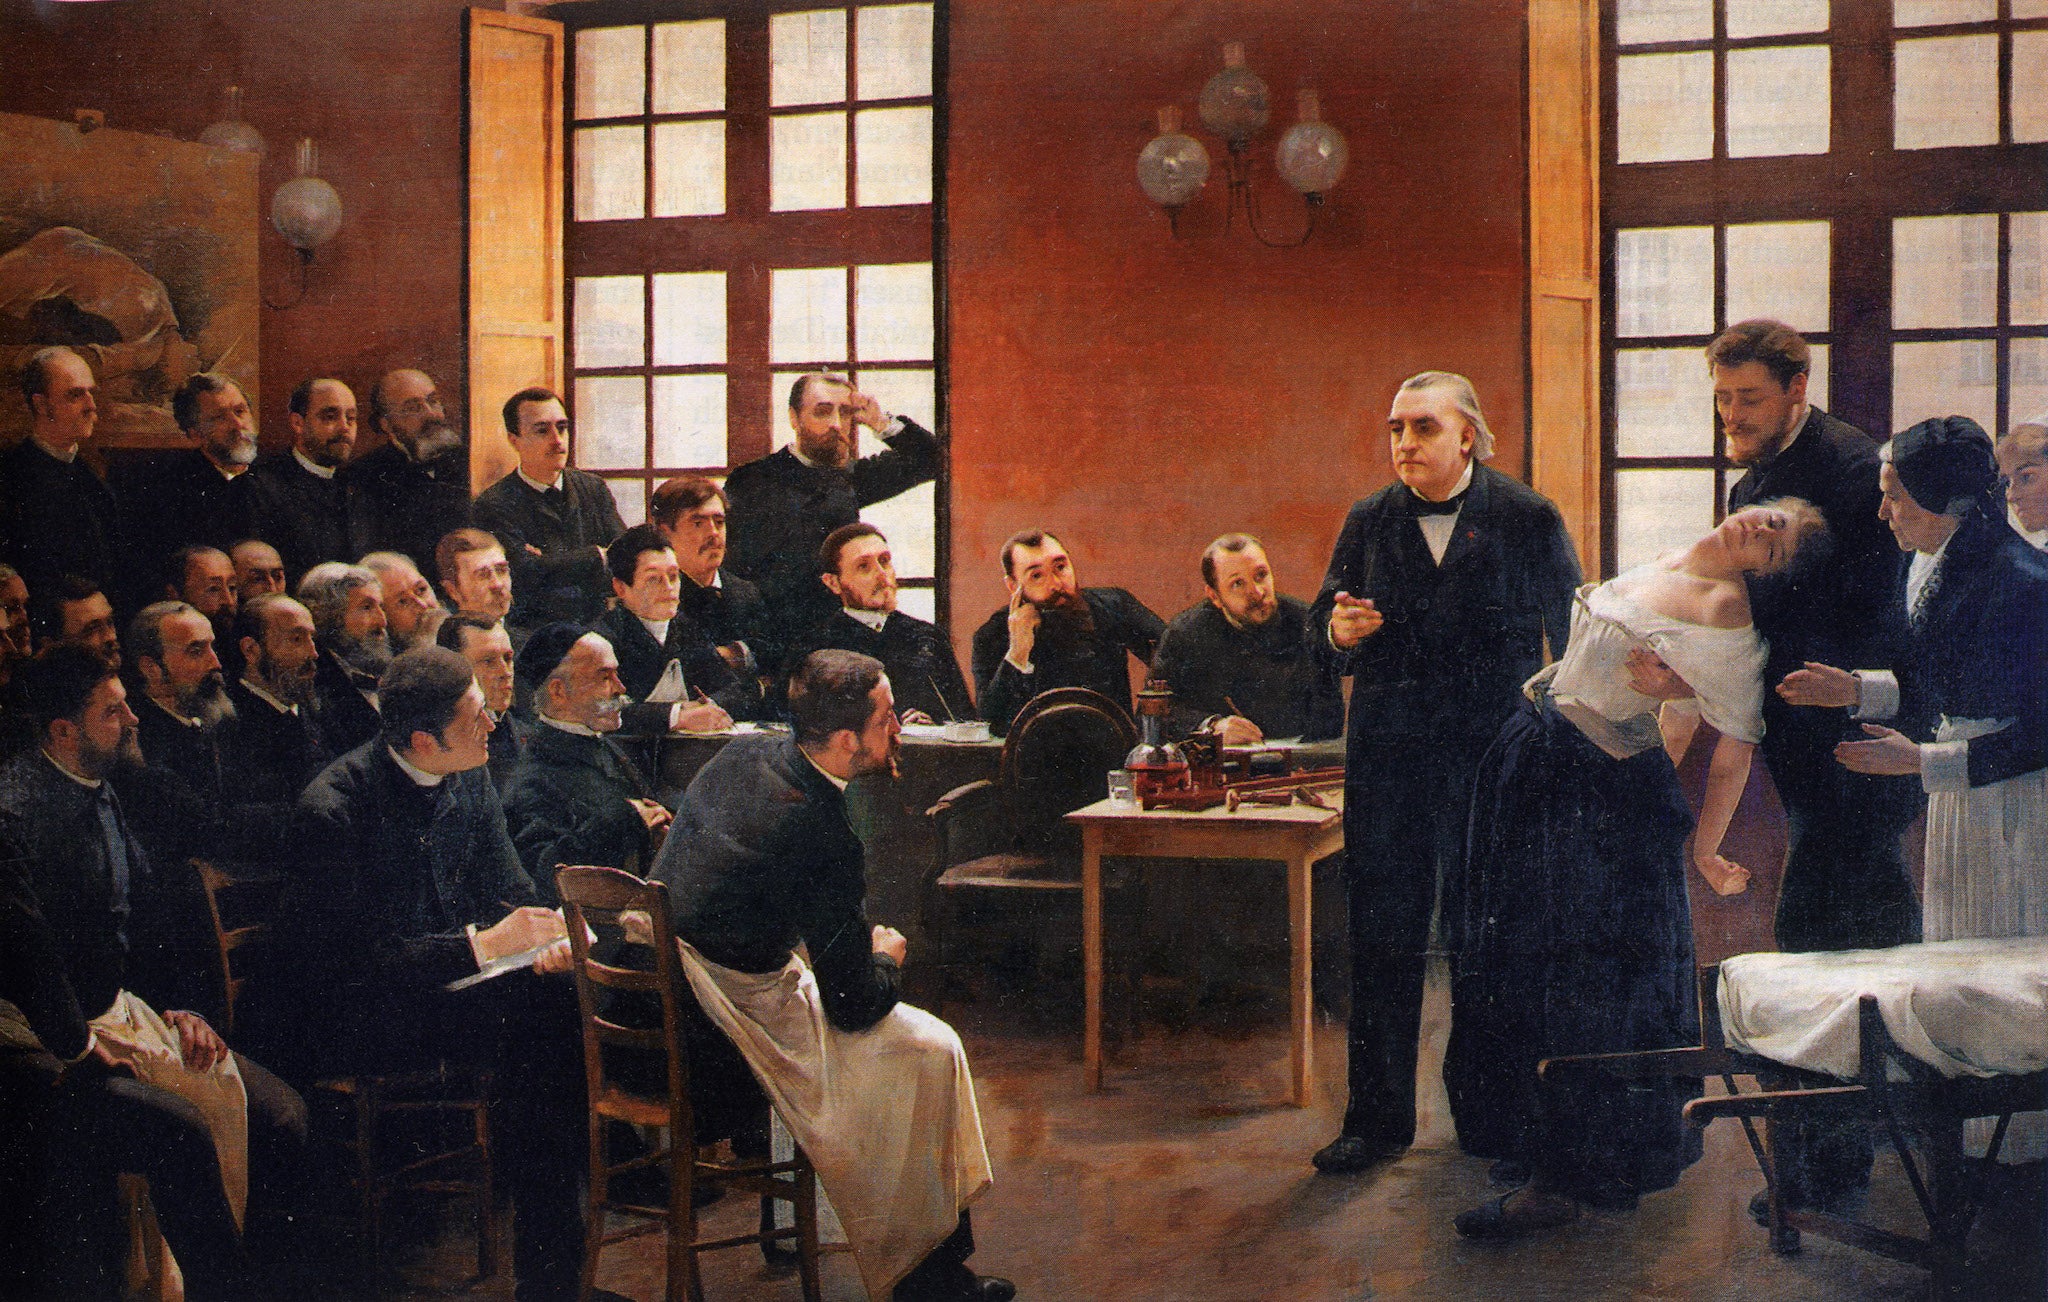 Jean-Martin Charcot presents a half-dressed woman to demonstrate hysteria to a group of men in ‘A Clinical Lesson at the Salpêtrière’ by André Brouillet (1887)